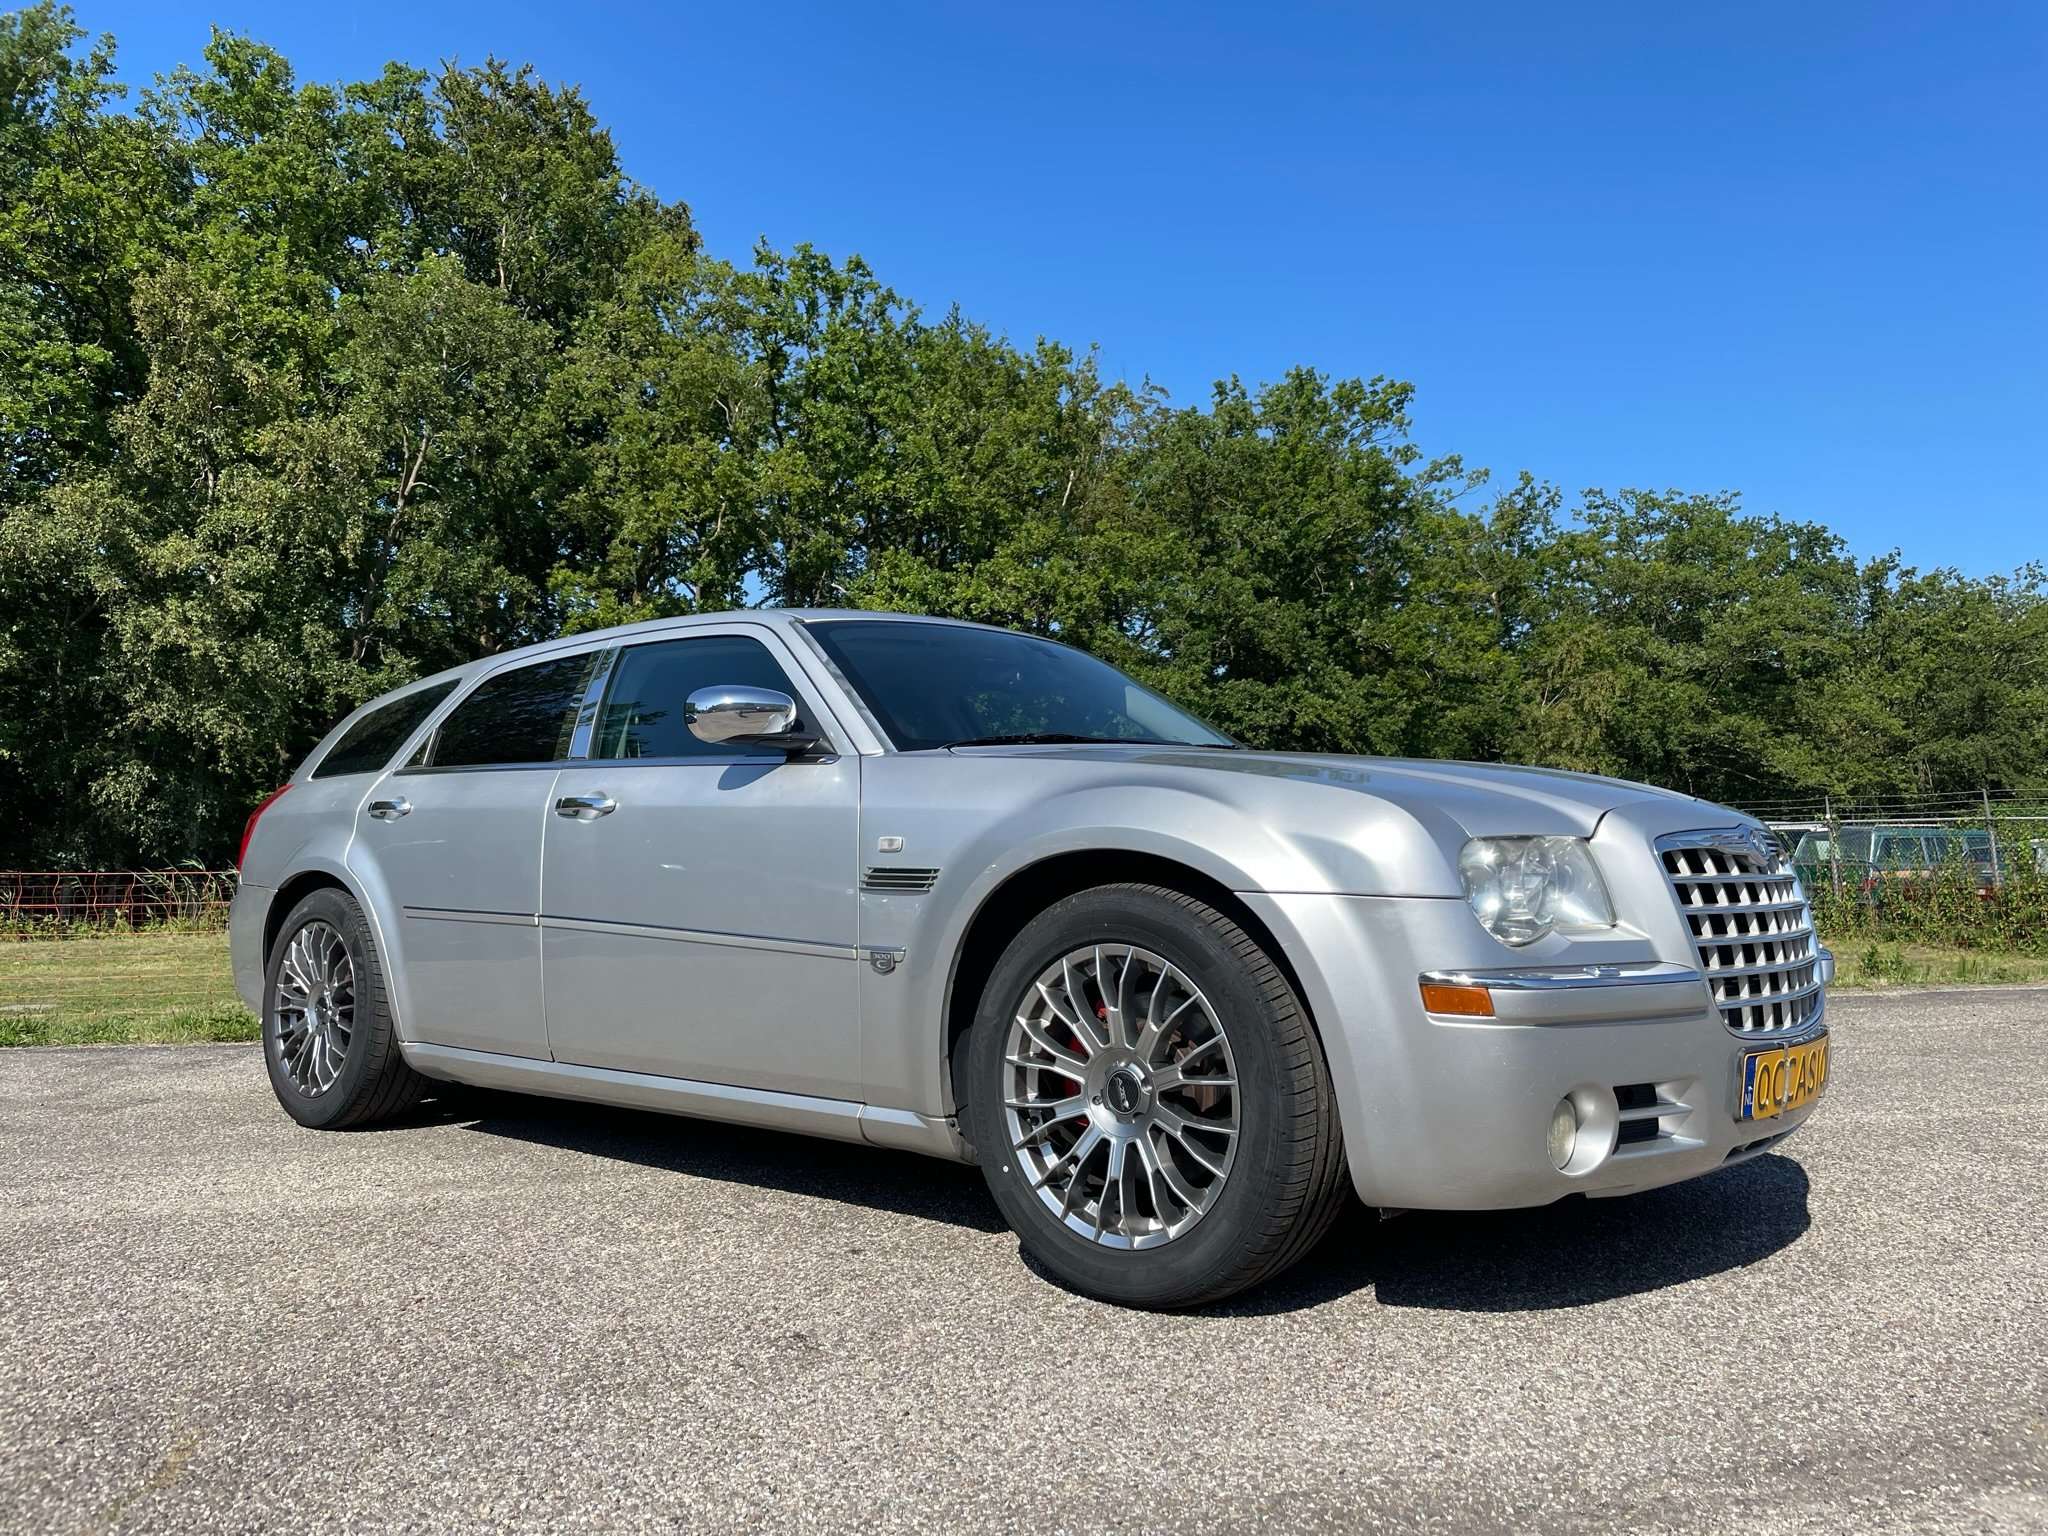 Chrysler 300C Compact in Grey used in HEEMSTEDE for € 13,950.-